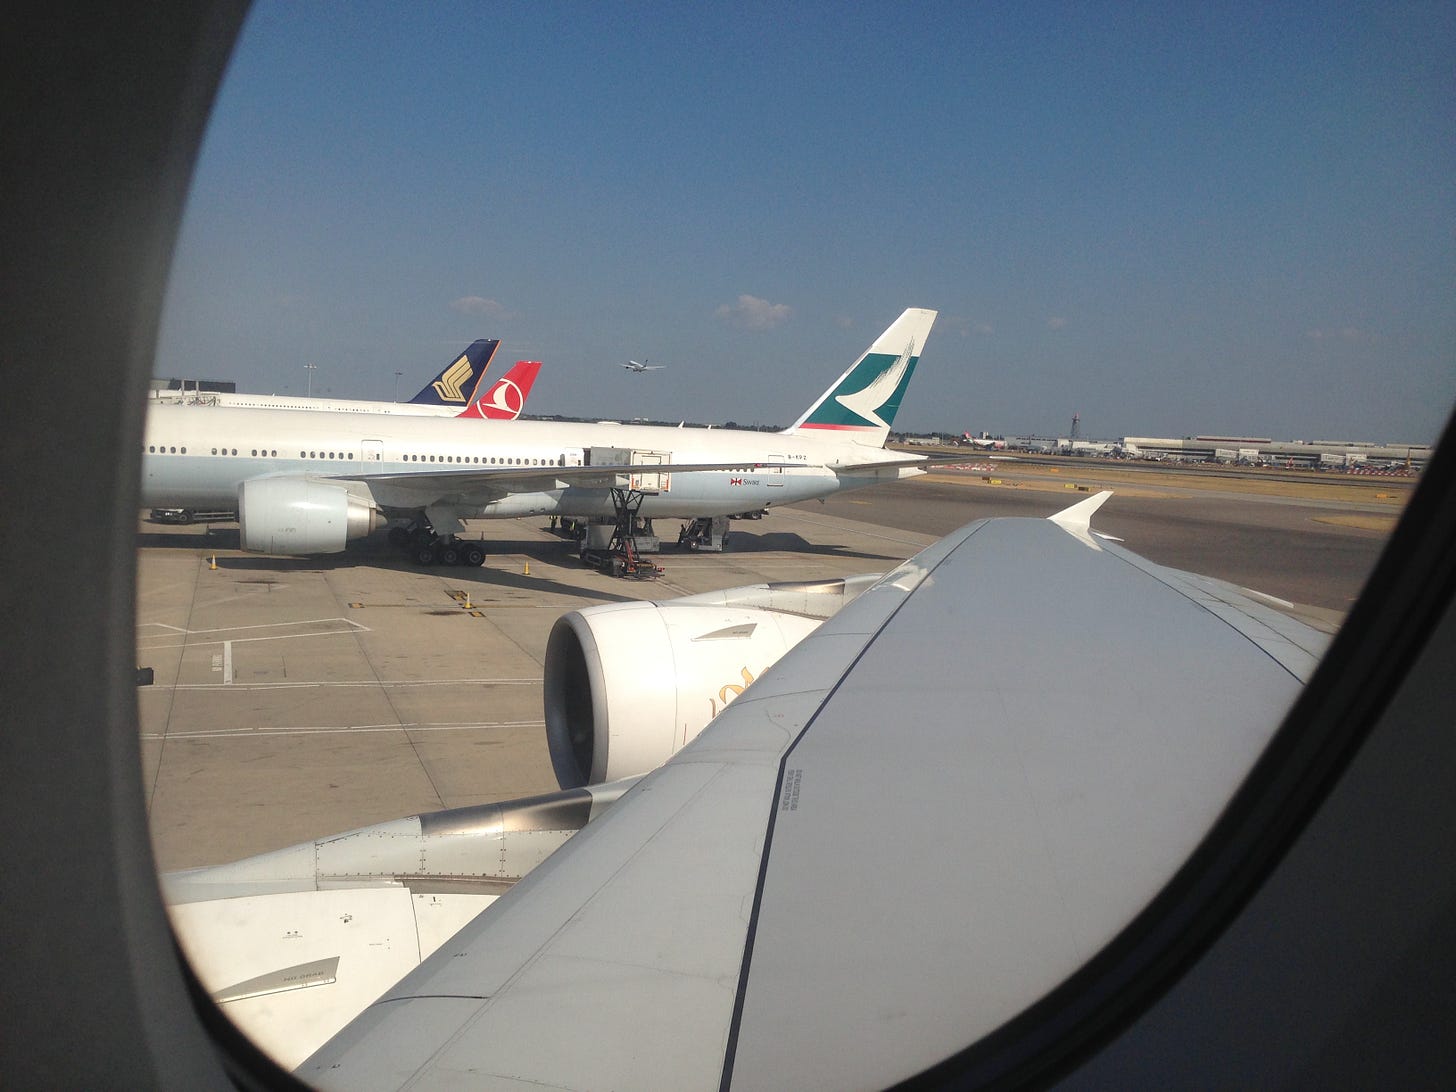 View from an aircraft window while still at the gate showing the wing, engine and other aircraft in the distance